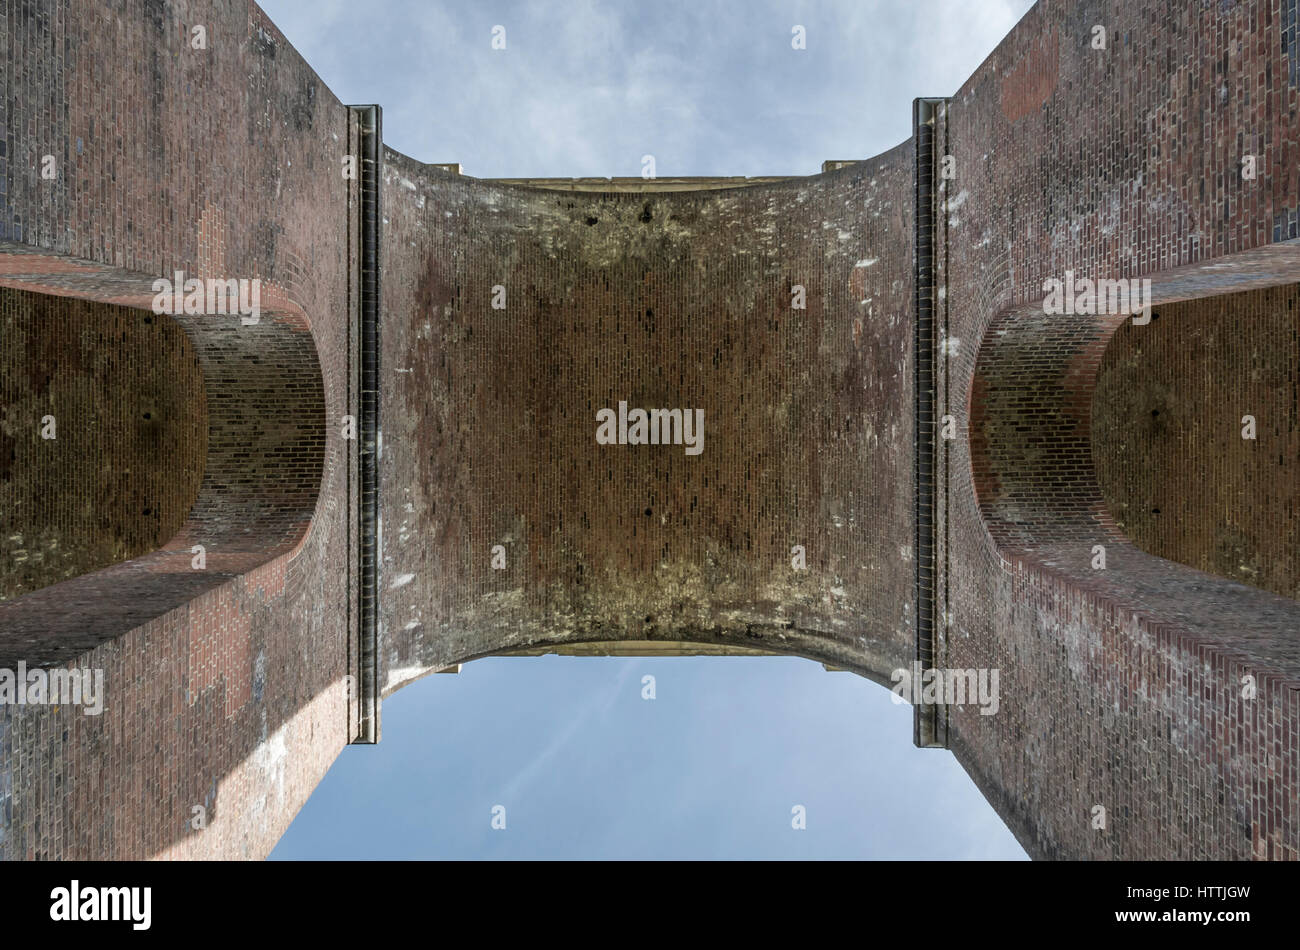 Looking upwards from underneath Ouse Valley (Balcombe) Viaduct, West Sussex, UK Stock Photo